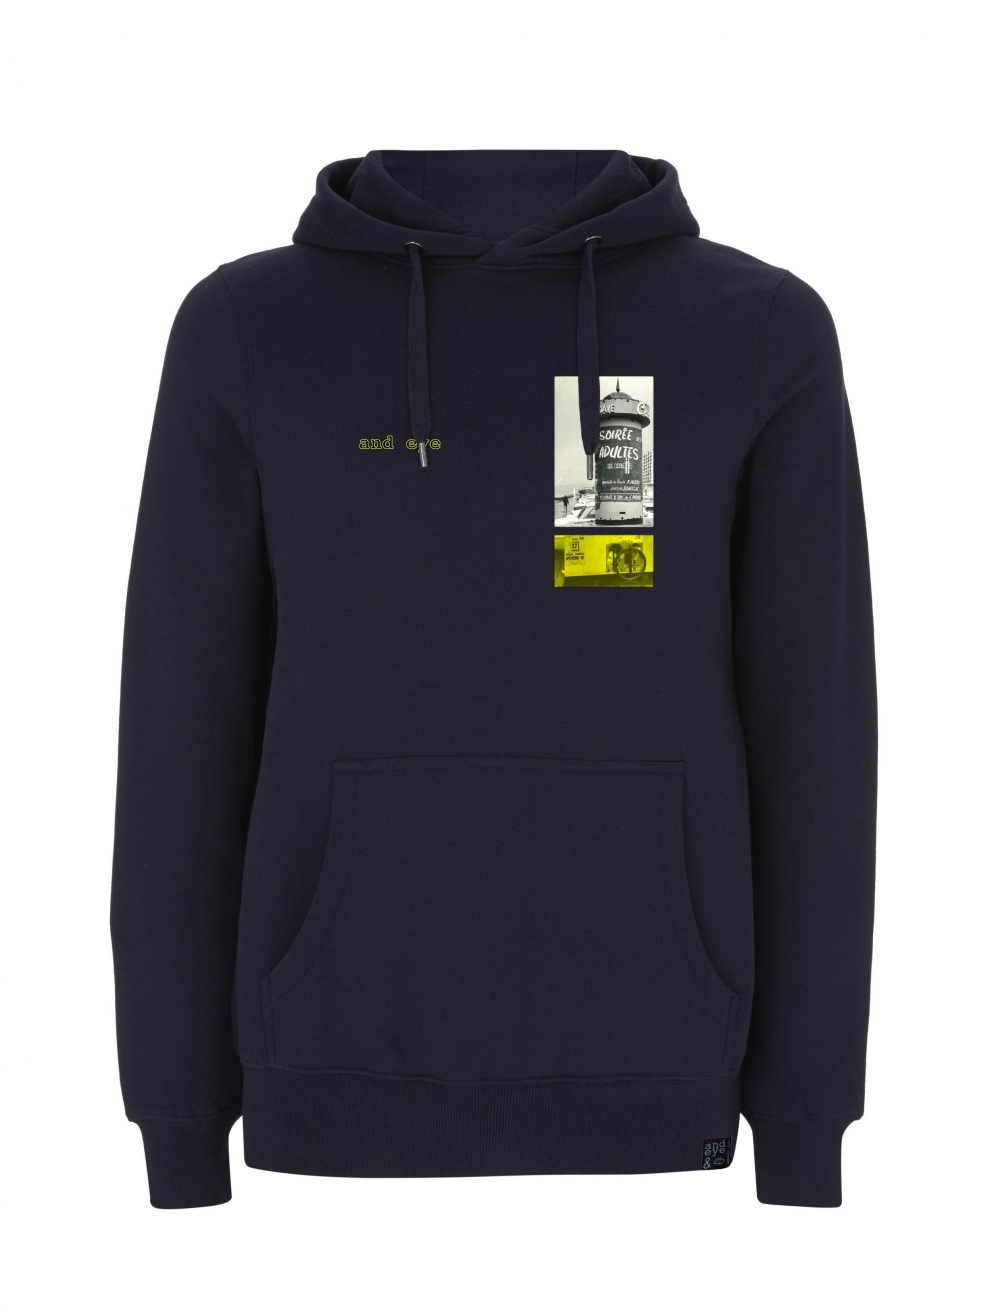 Pullover hoody with a vintage image of Hendaye